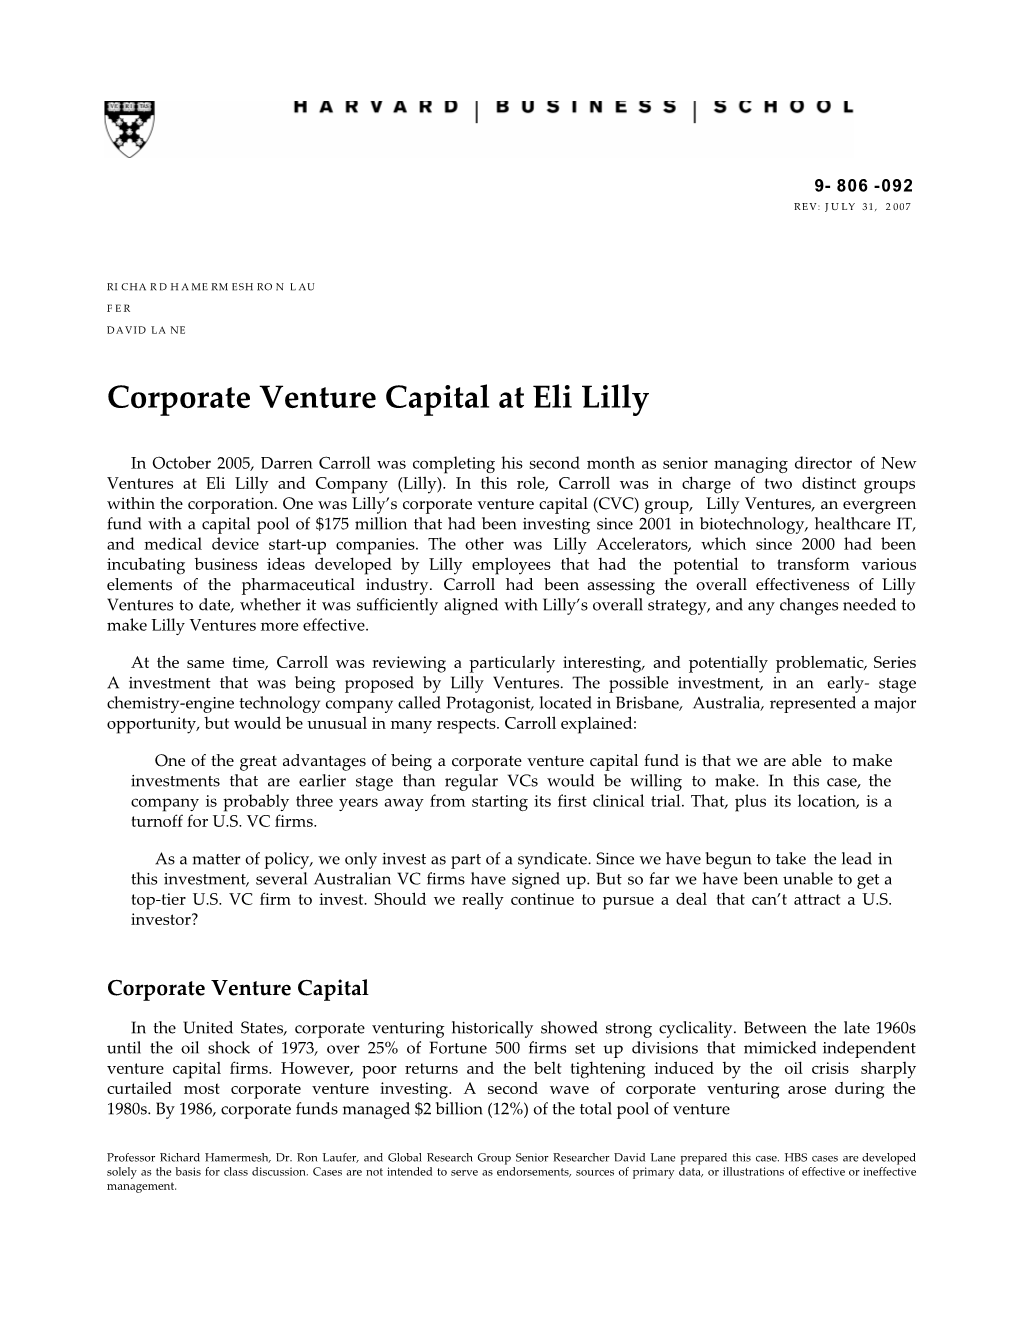 Corporate Venture Capital at Elililly